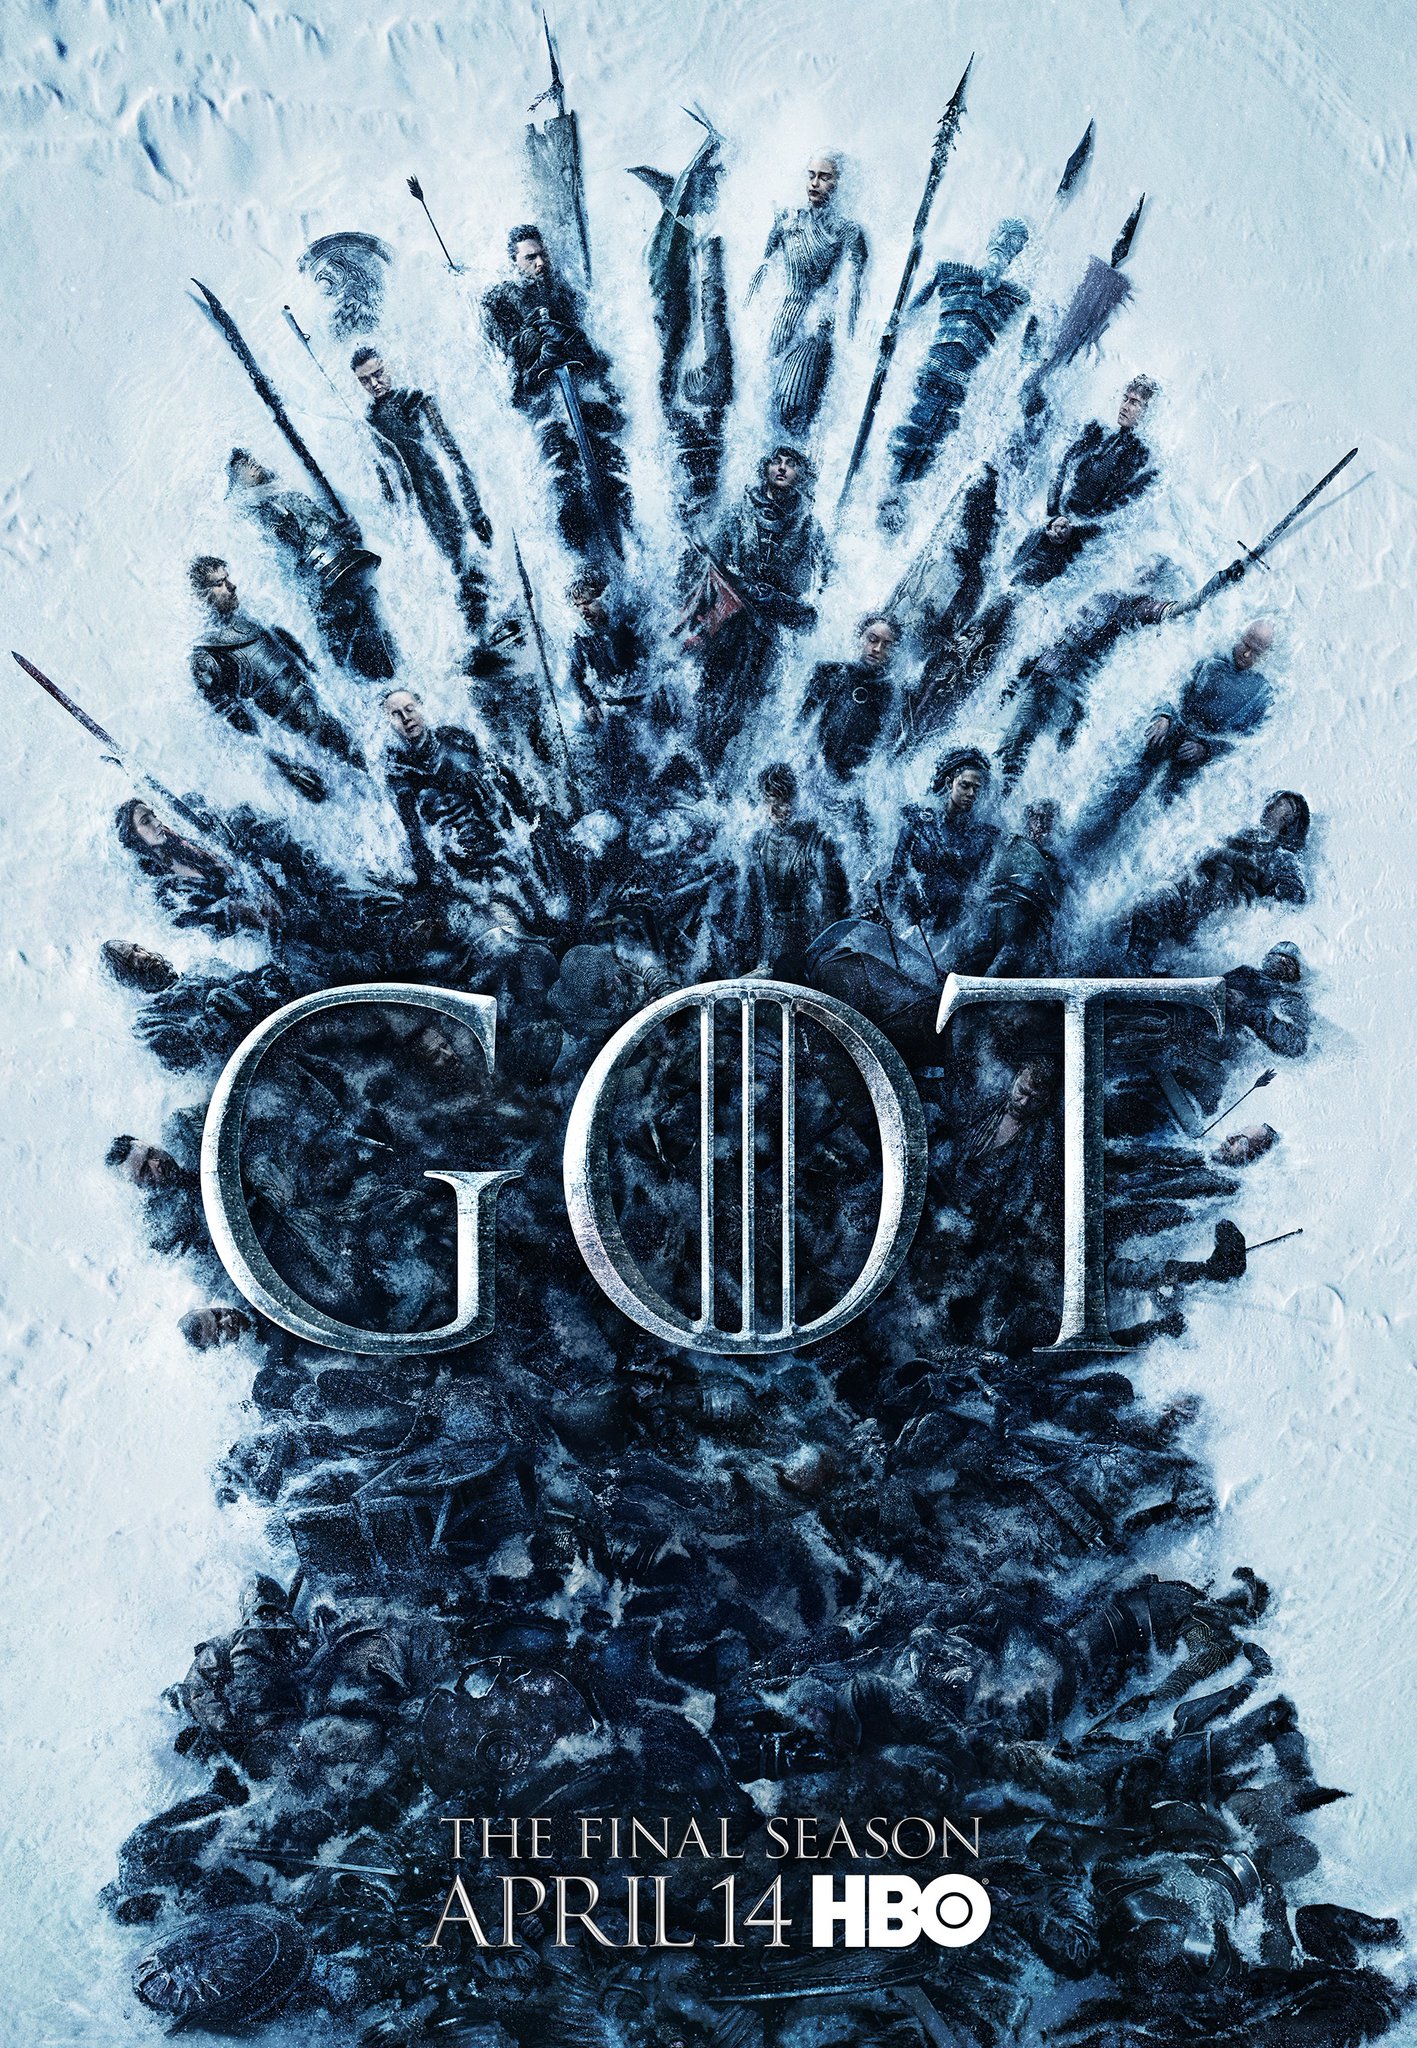 Game Of Thrones Promo And Poster Hit: Fight For The Living